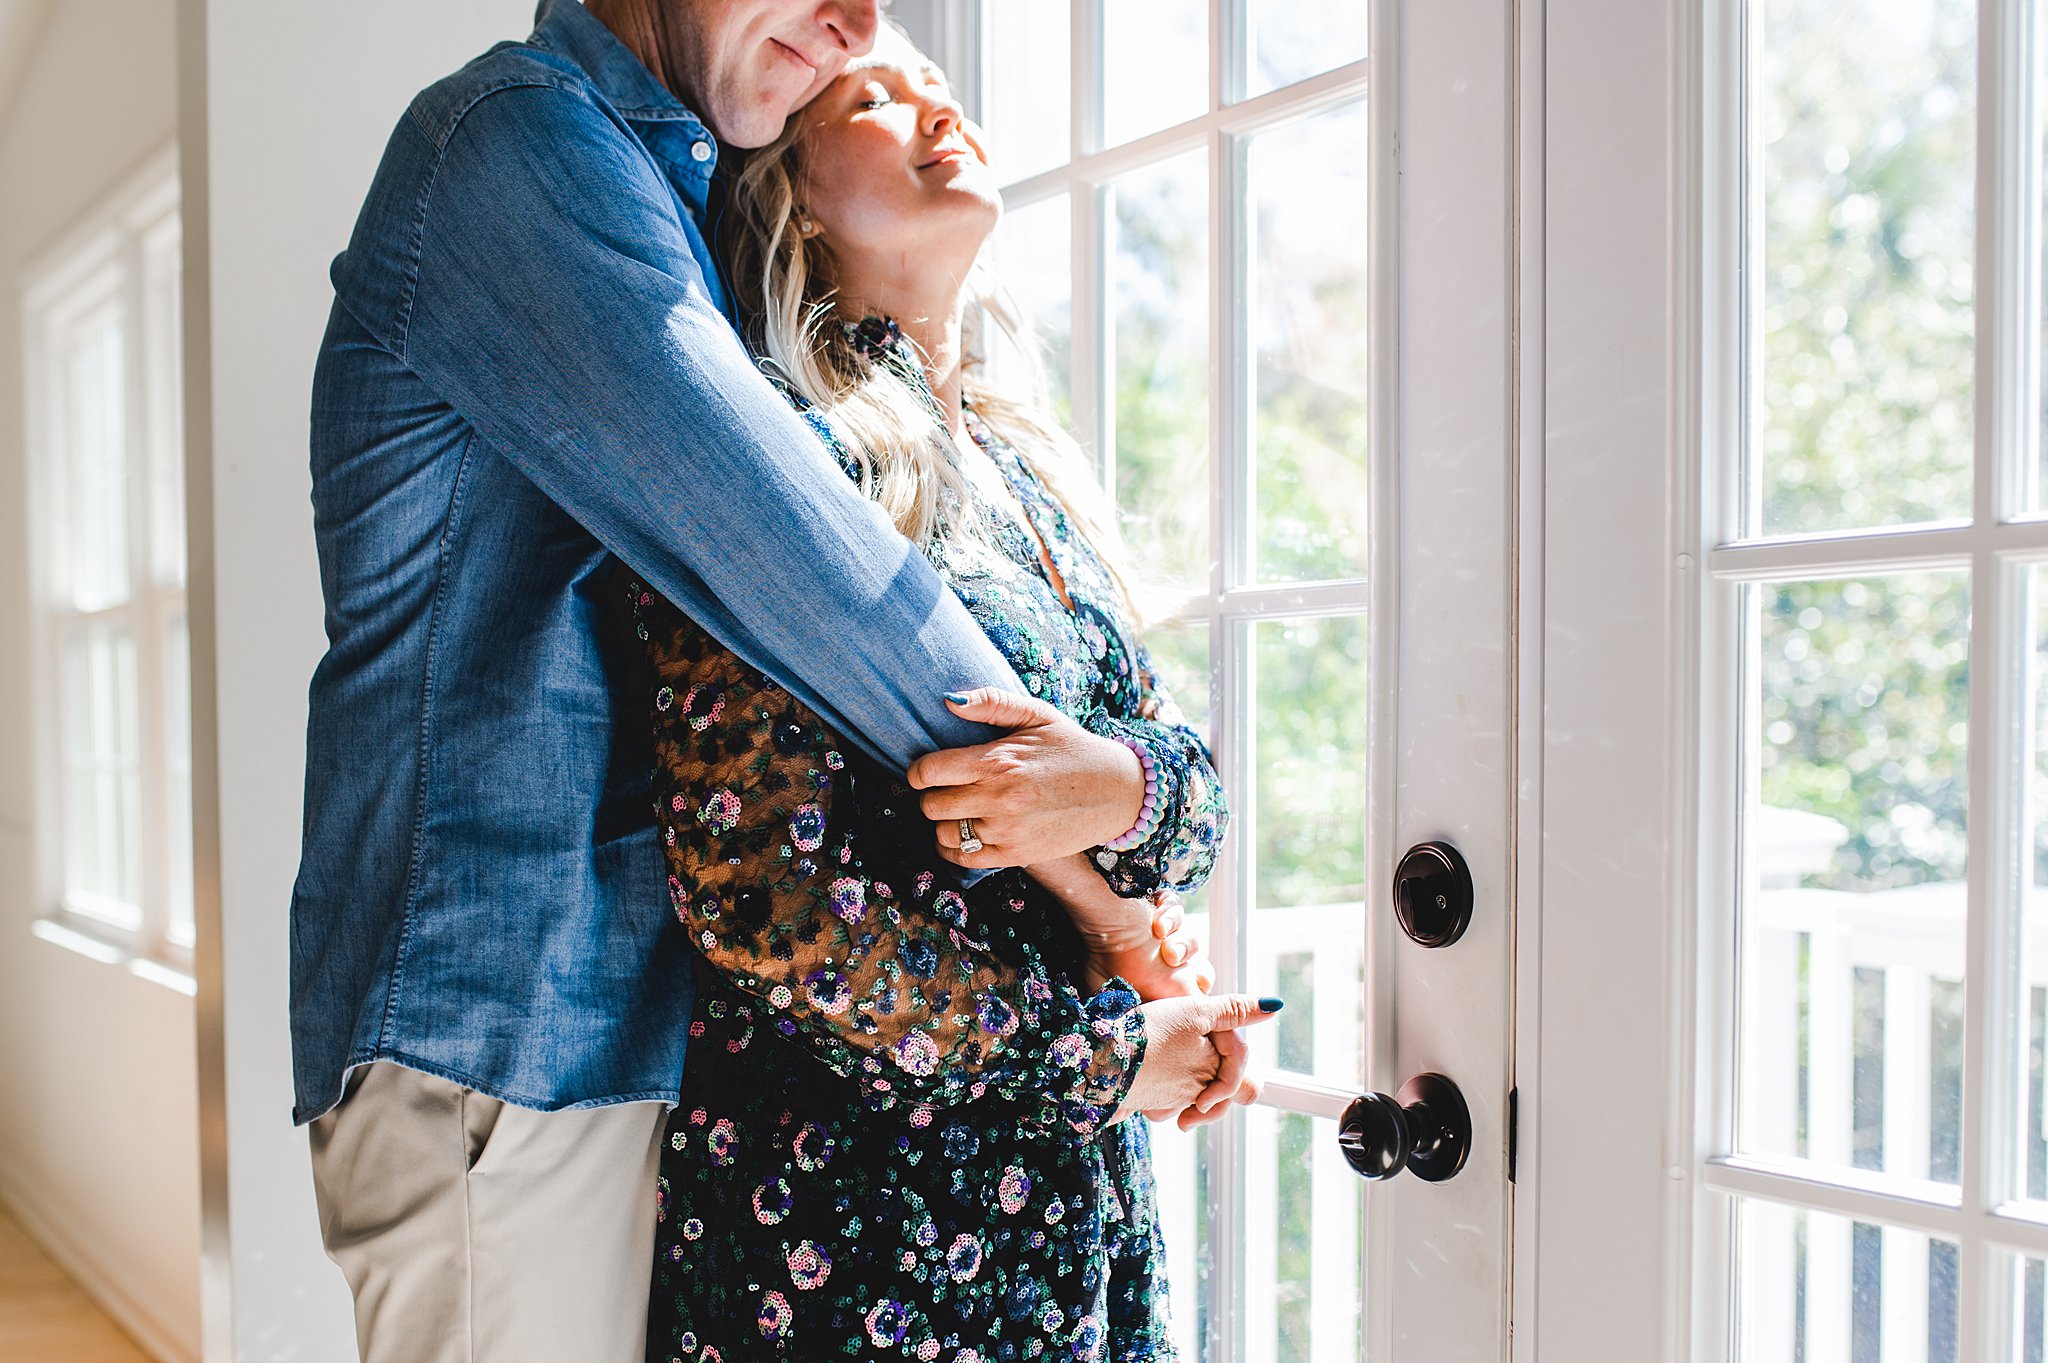 Mom wears a sequin dress for her family photos. Dad hugs her from behind near a window.